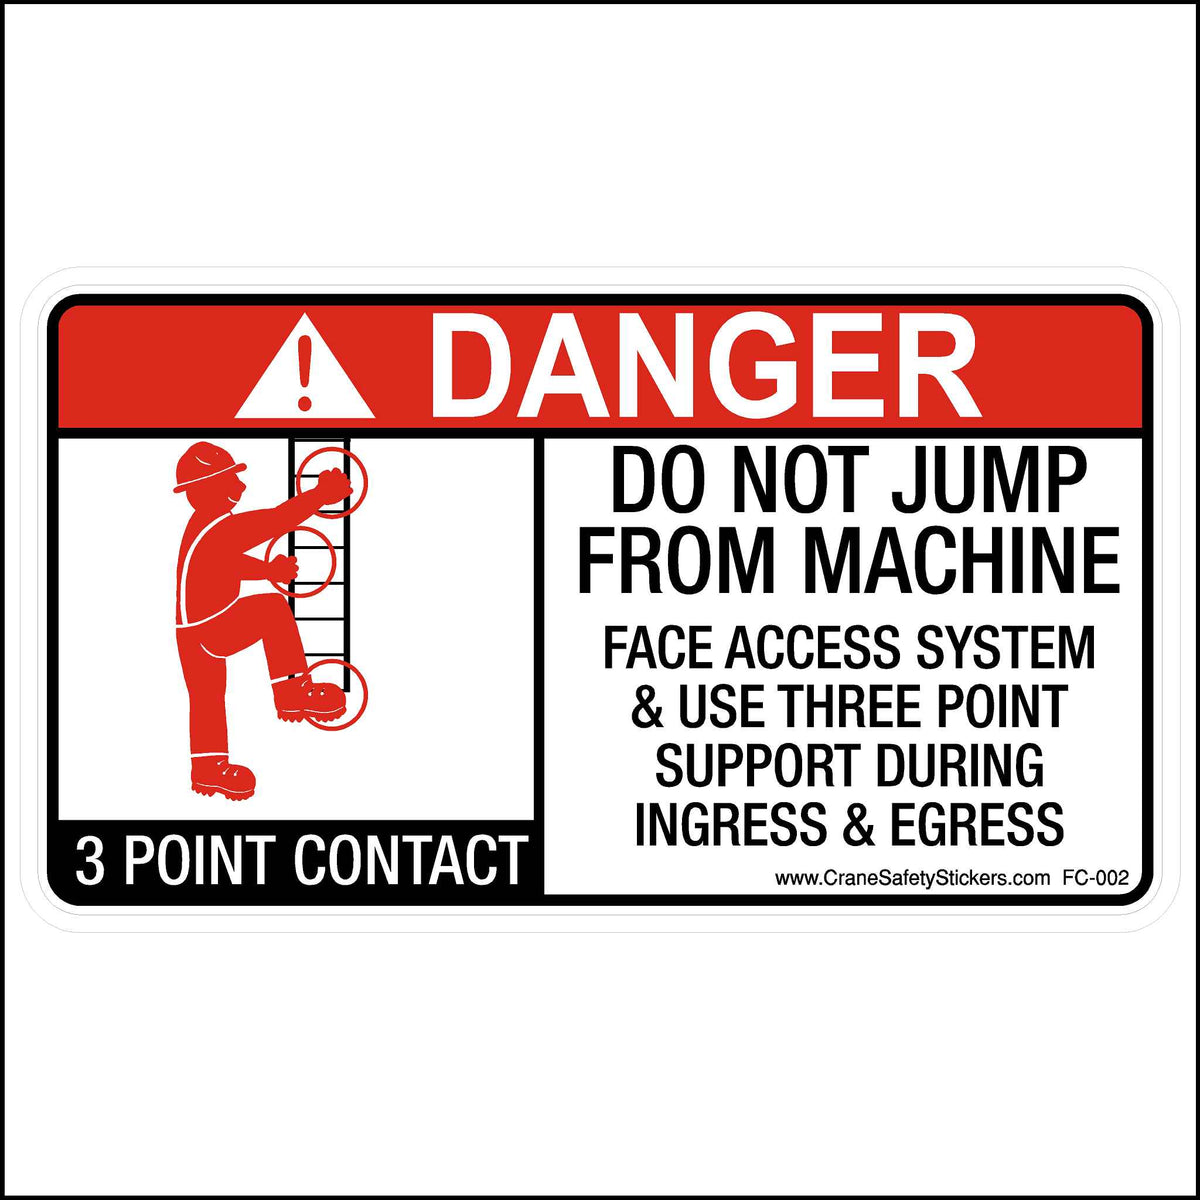 Three Point Egress Stickers and 3 Point Contact Stickers printed with.  Do not jump from the machine. Face access system and use three-point support during ingress and egress.